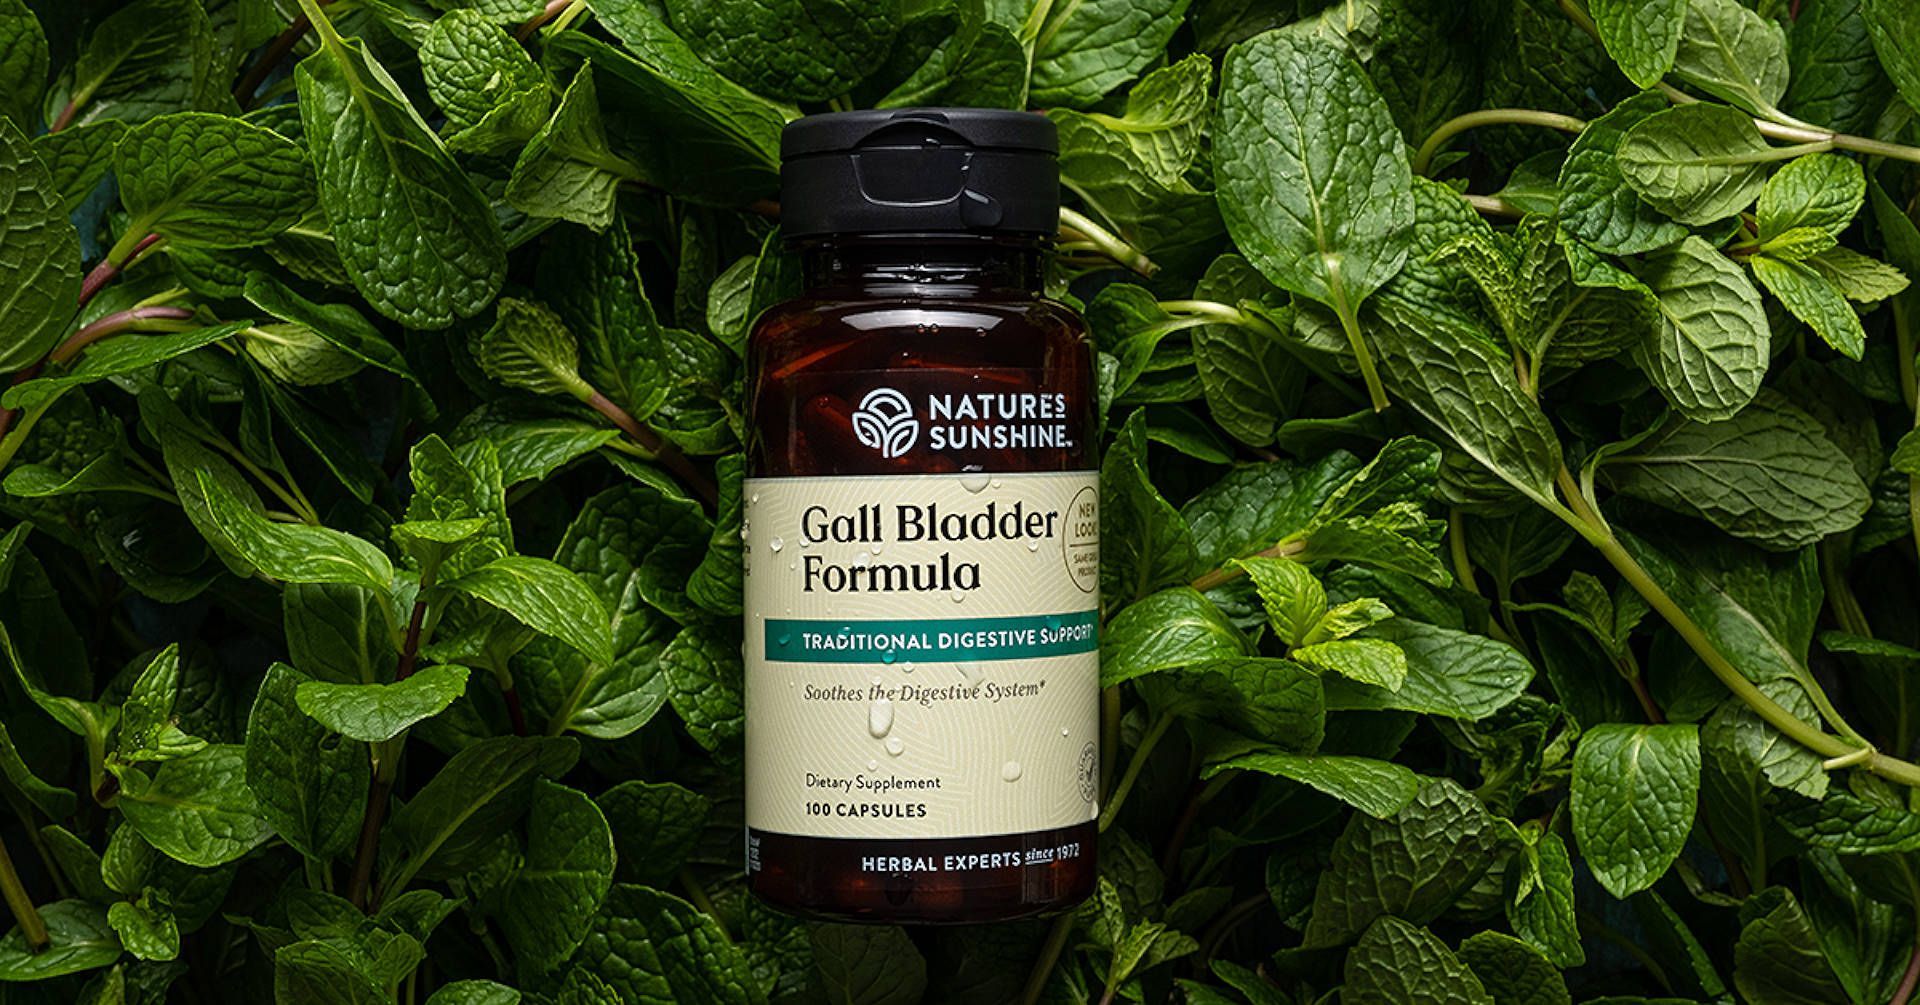 herbs used historically for gall bladder issues. Natures Sunshine Product called GALL BLADDER FORMULA